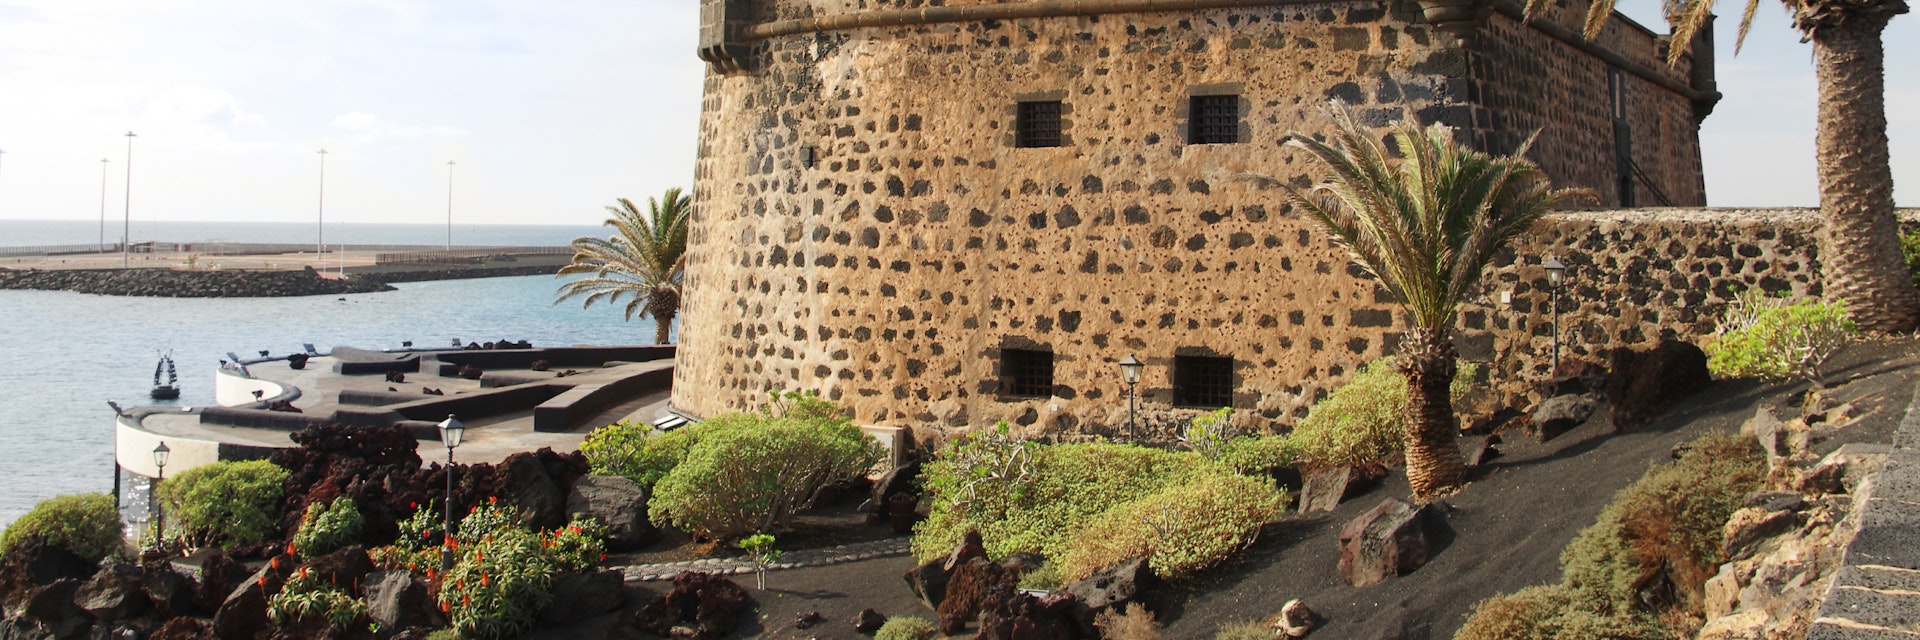 Castillo San Jose in Arrecife, Lanzarote, Canary Islands; Shutterstock ID 177666716; Your name (First / Last): Tom Stainer; GL account no.: 65050 ; Netsuite department name: Online Editorial; Full Product or Project name including edition: Best in Travel 2018